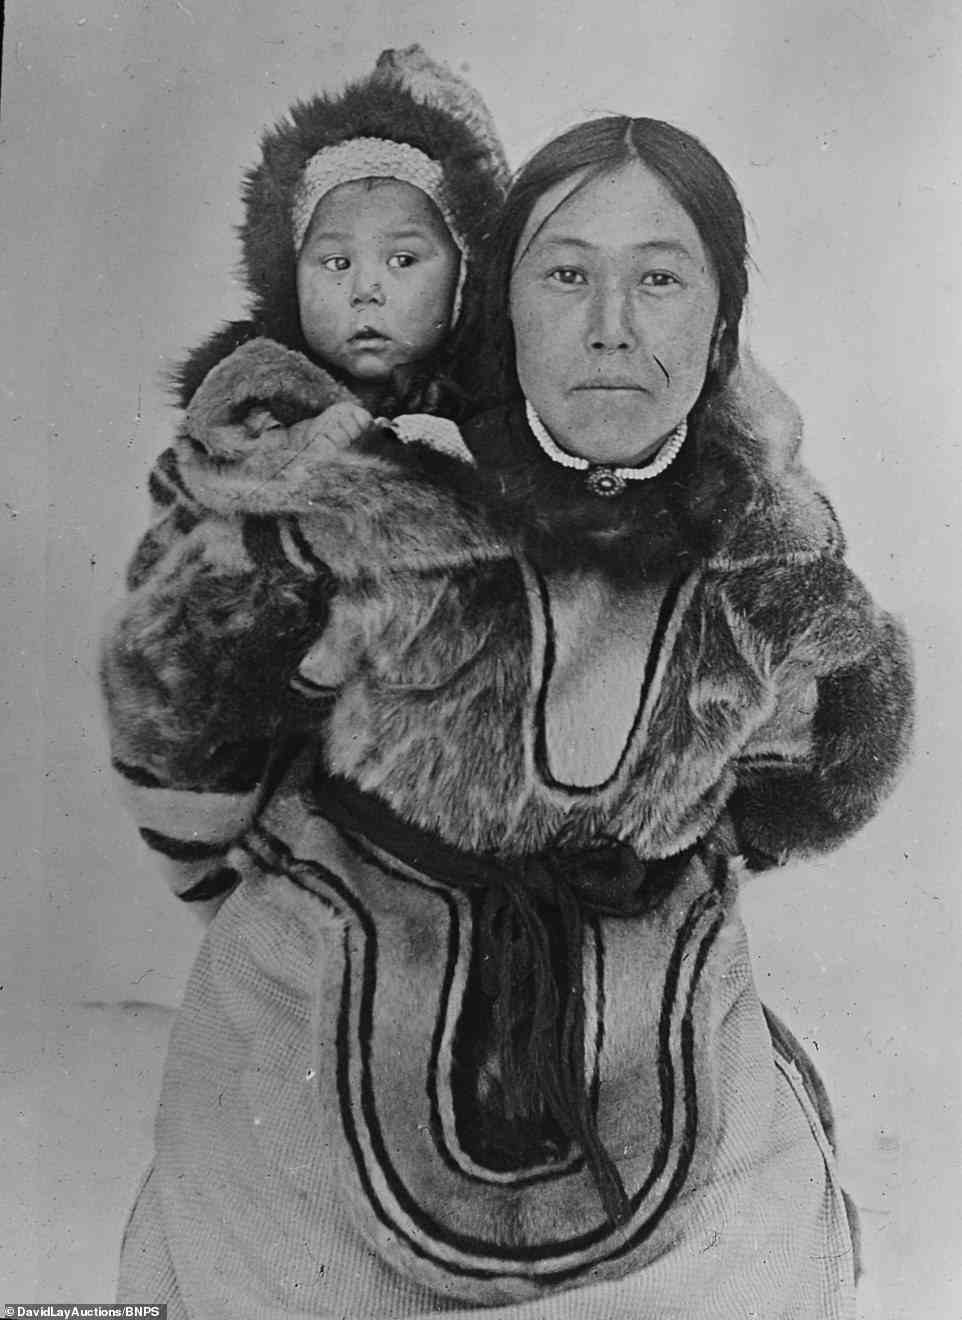 An Inuit woman smiles as she holds her baby inside her traditional amauti (parka) and the two pose for the camera in Labrador